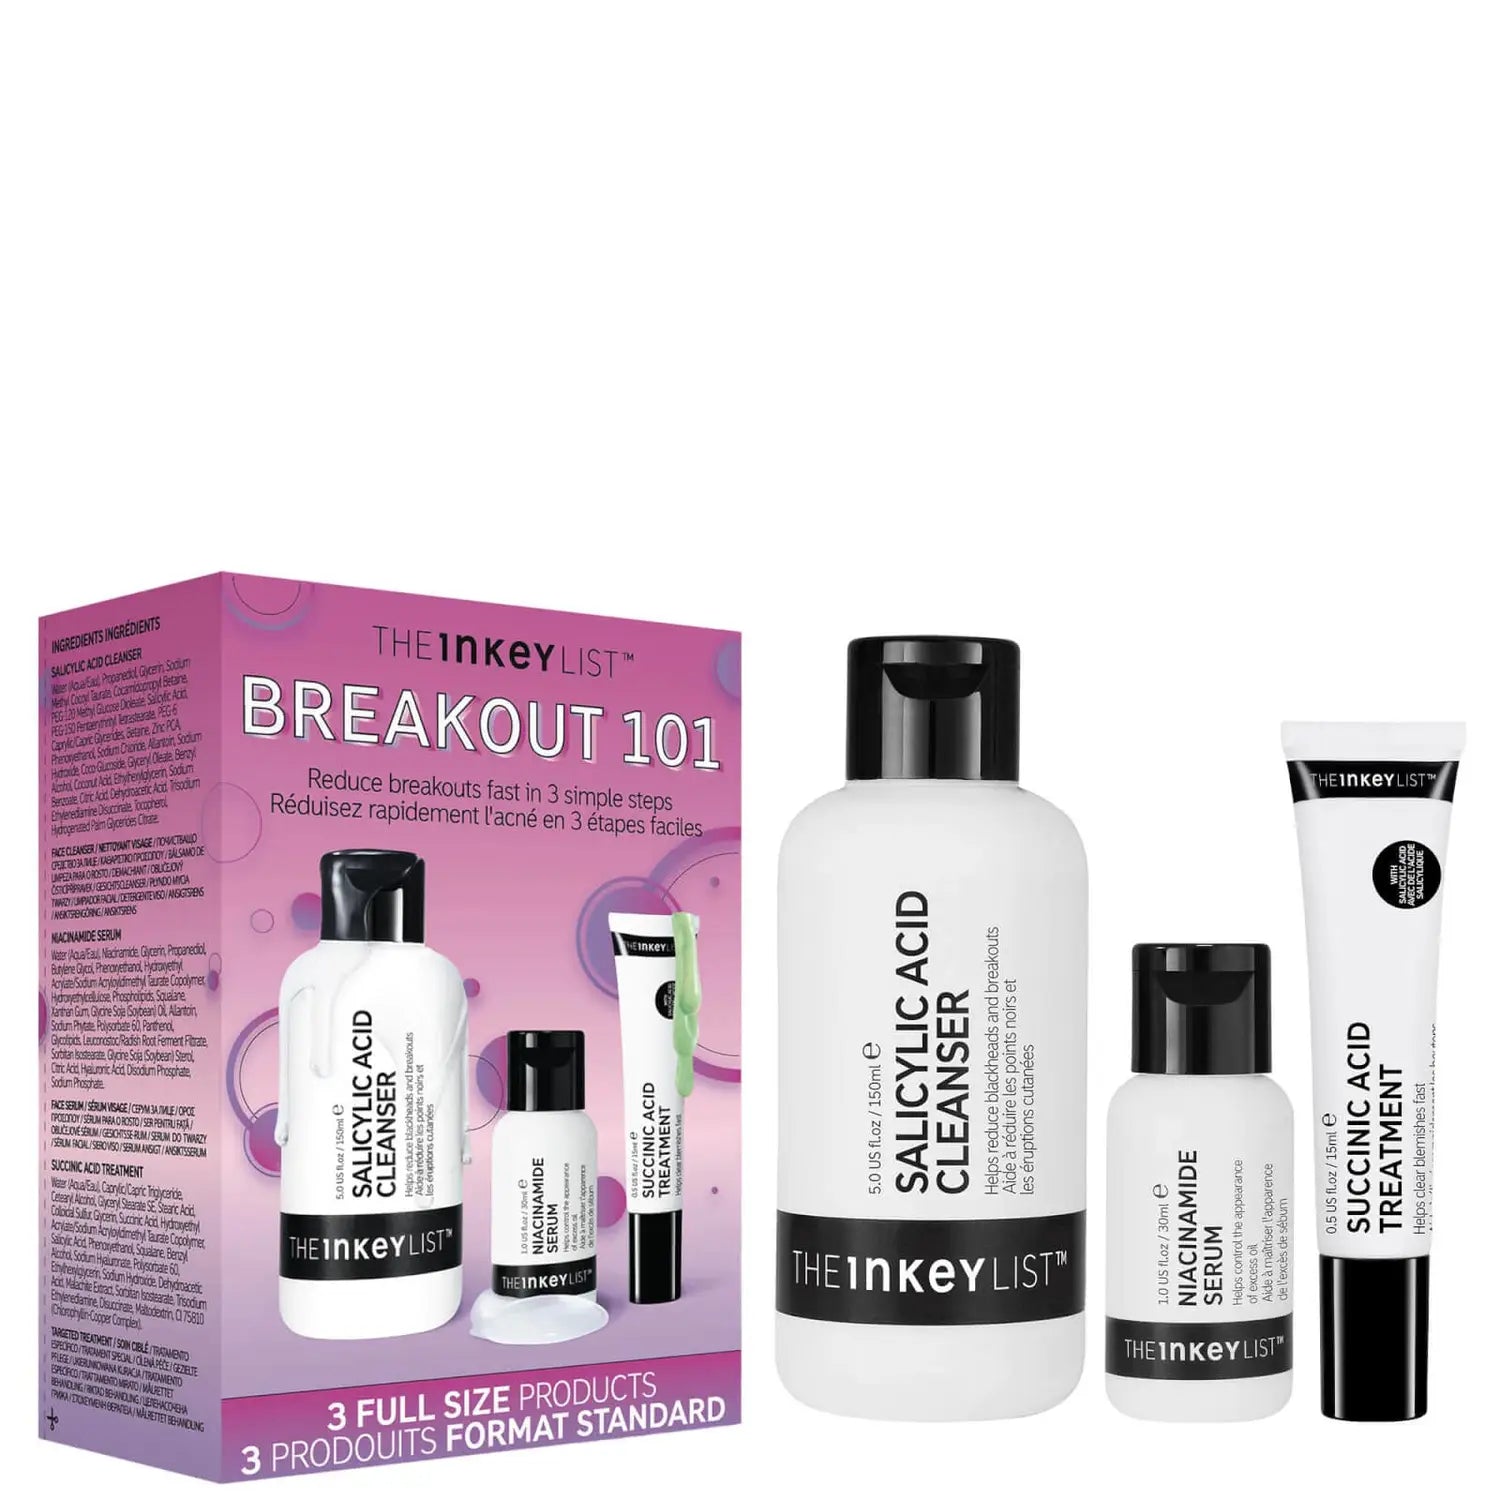 The Inkey List Breakout 101, products and packaging